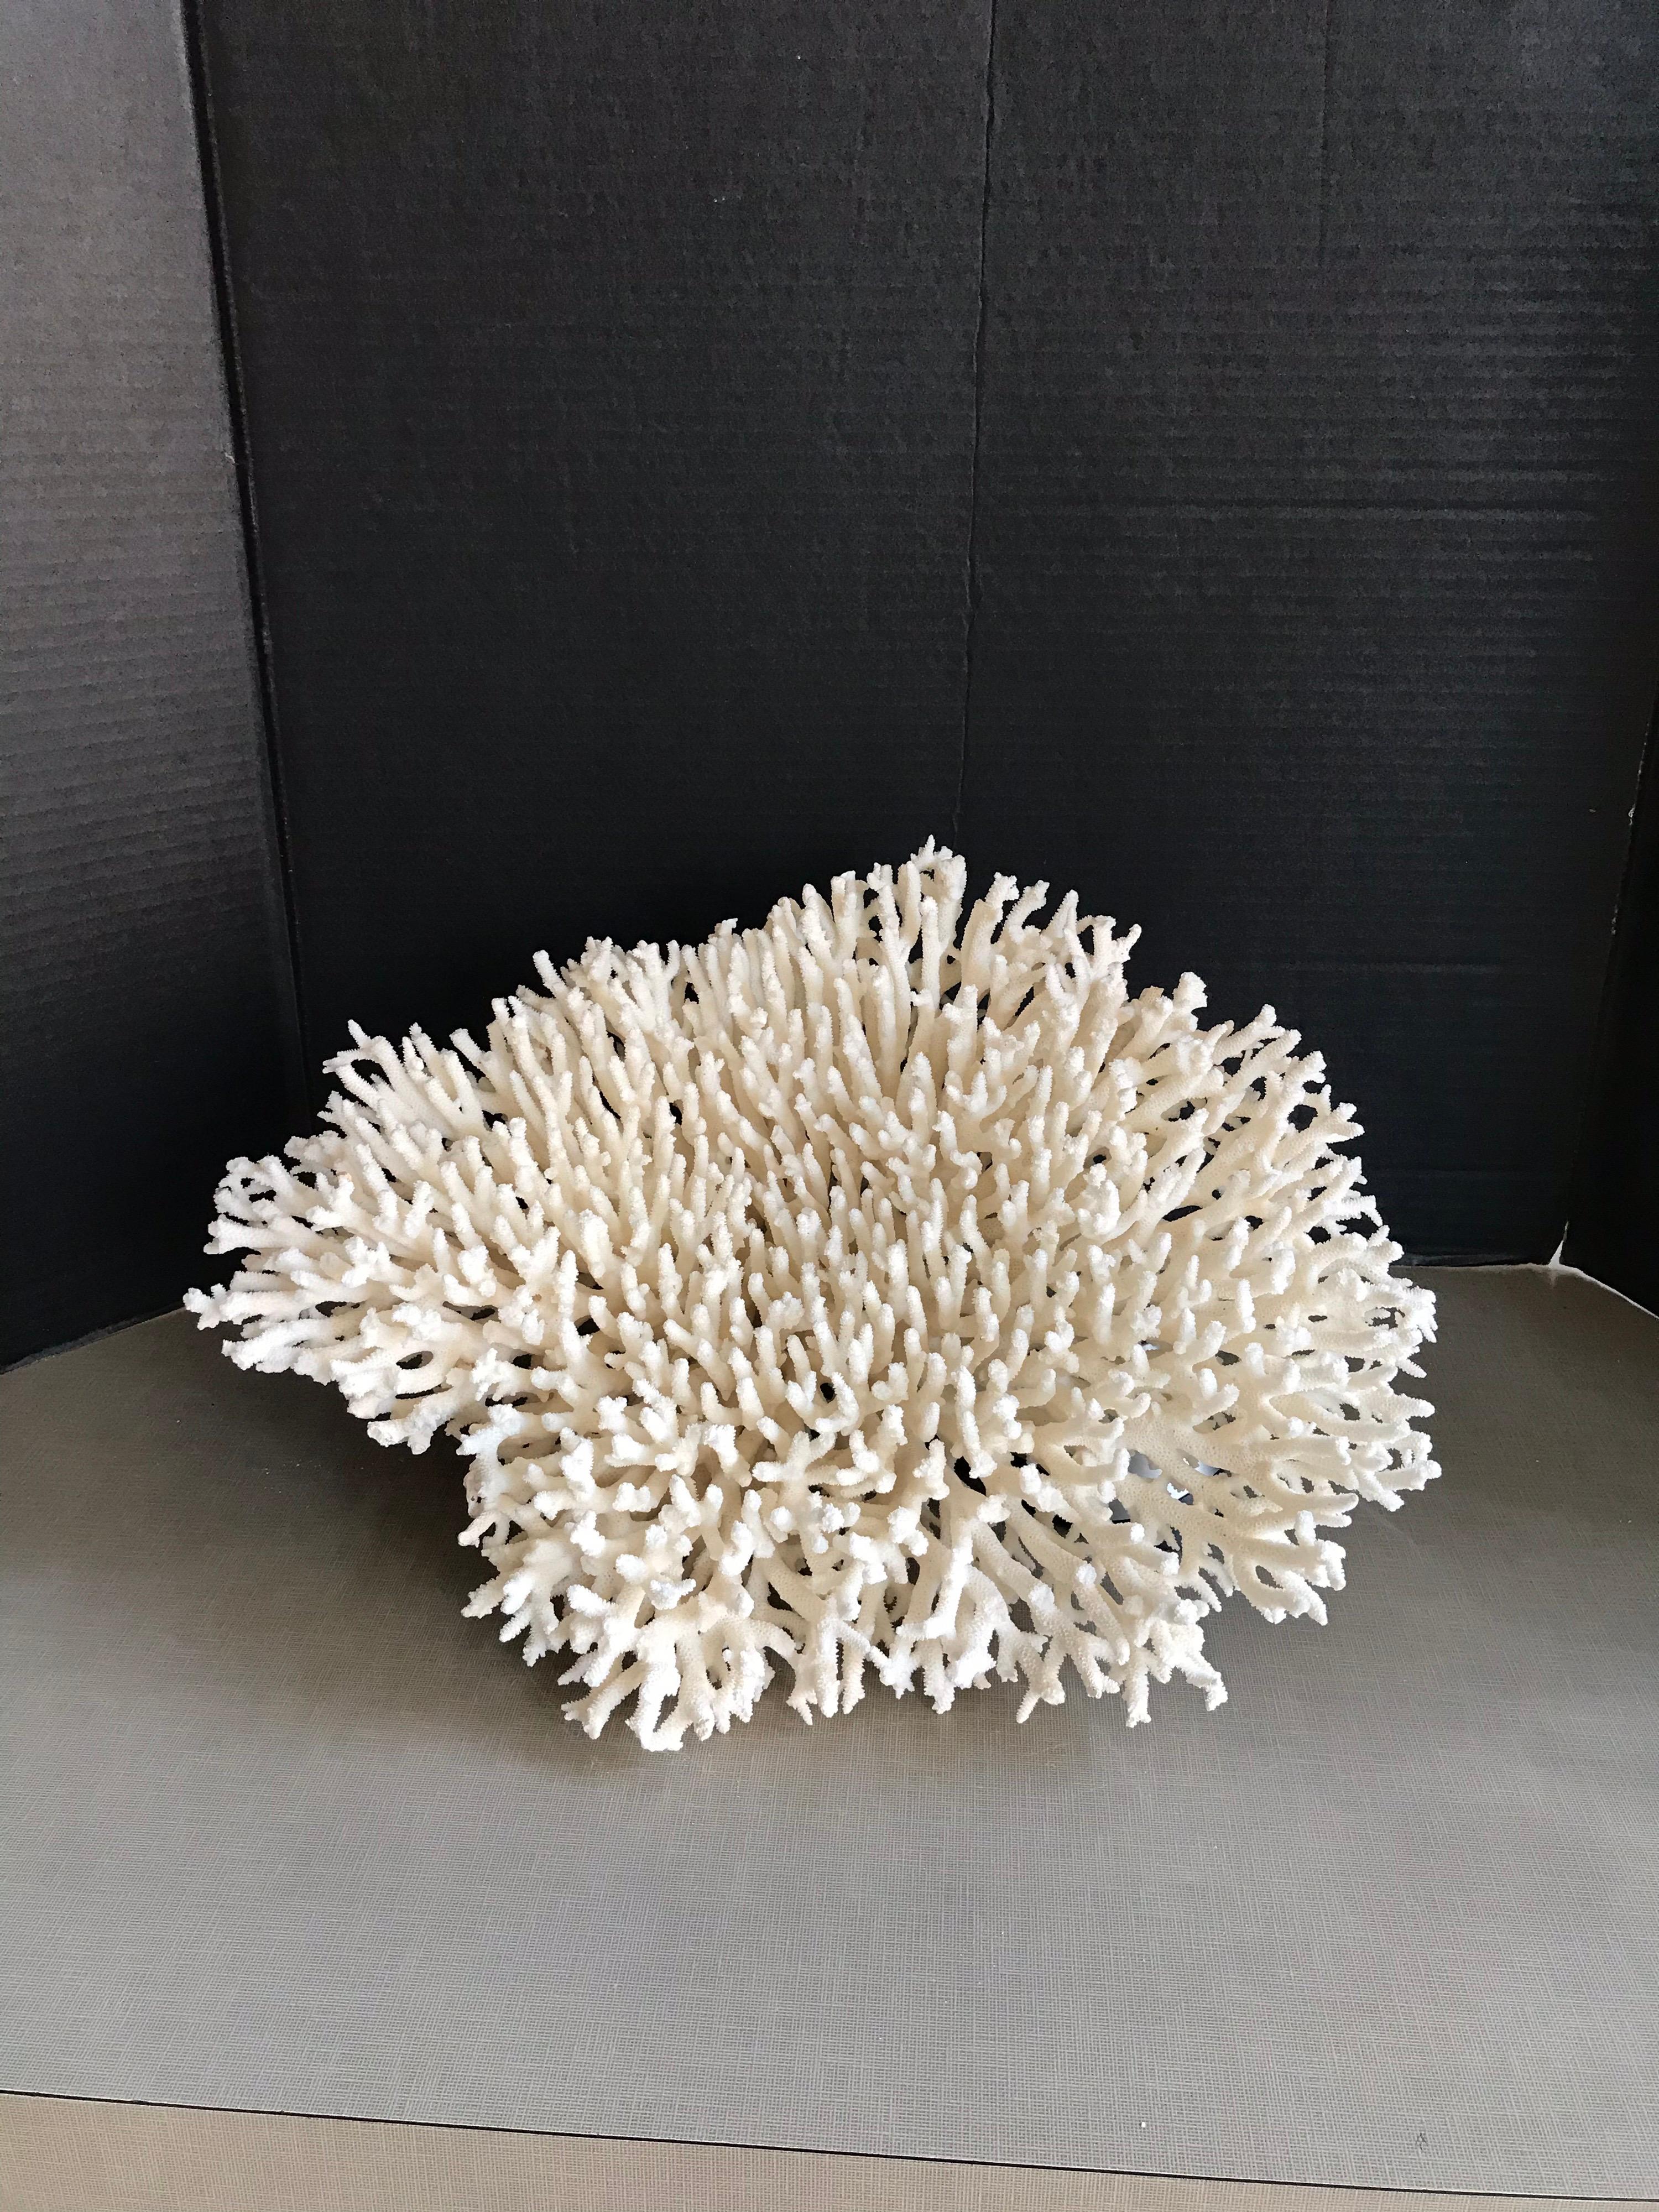 This is a beautiful extra large specimen of table coral from the Philippines.